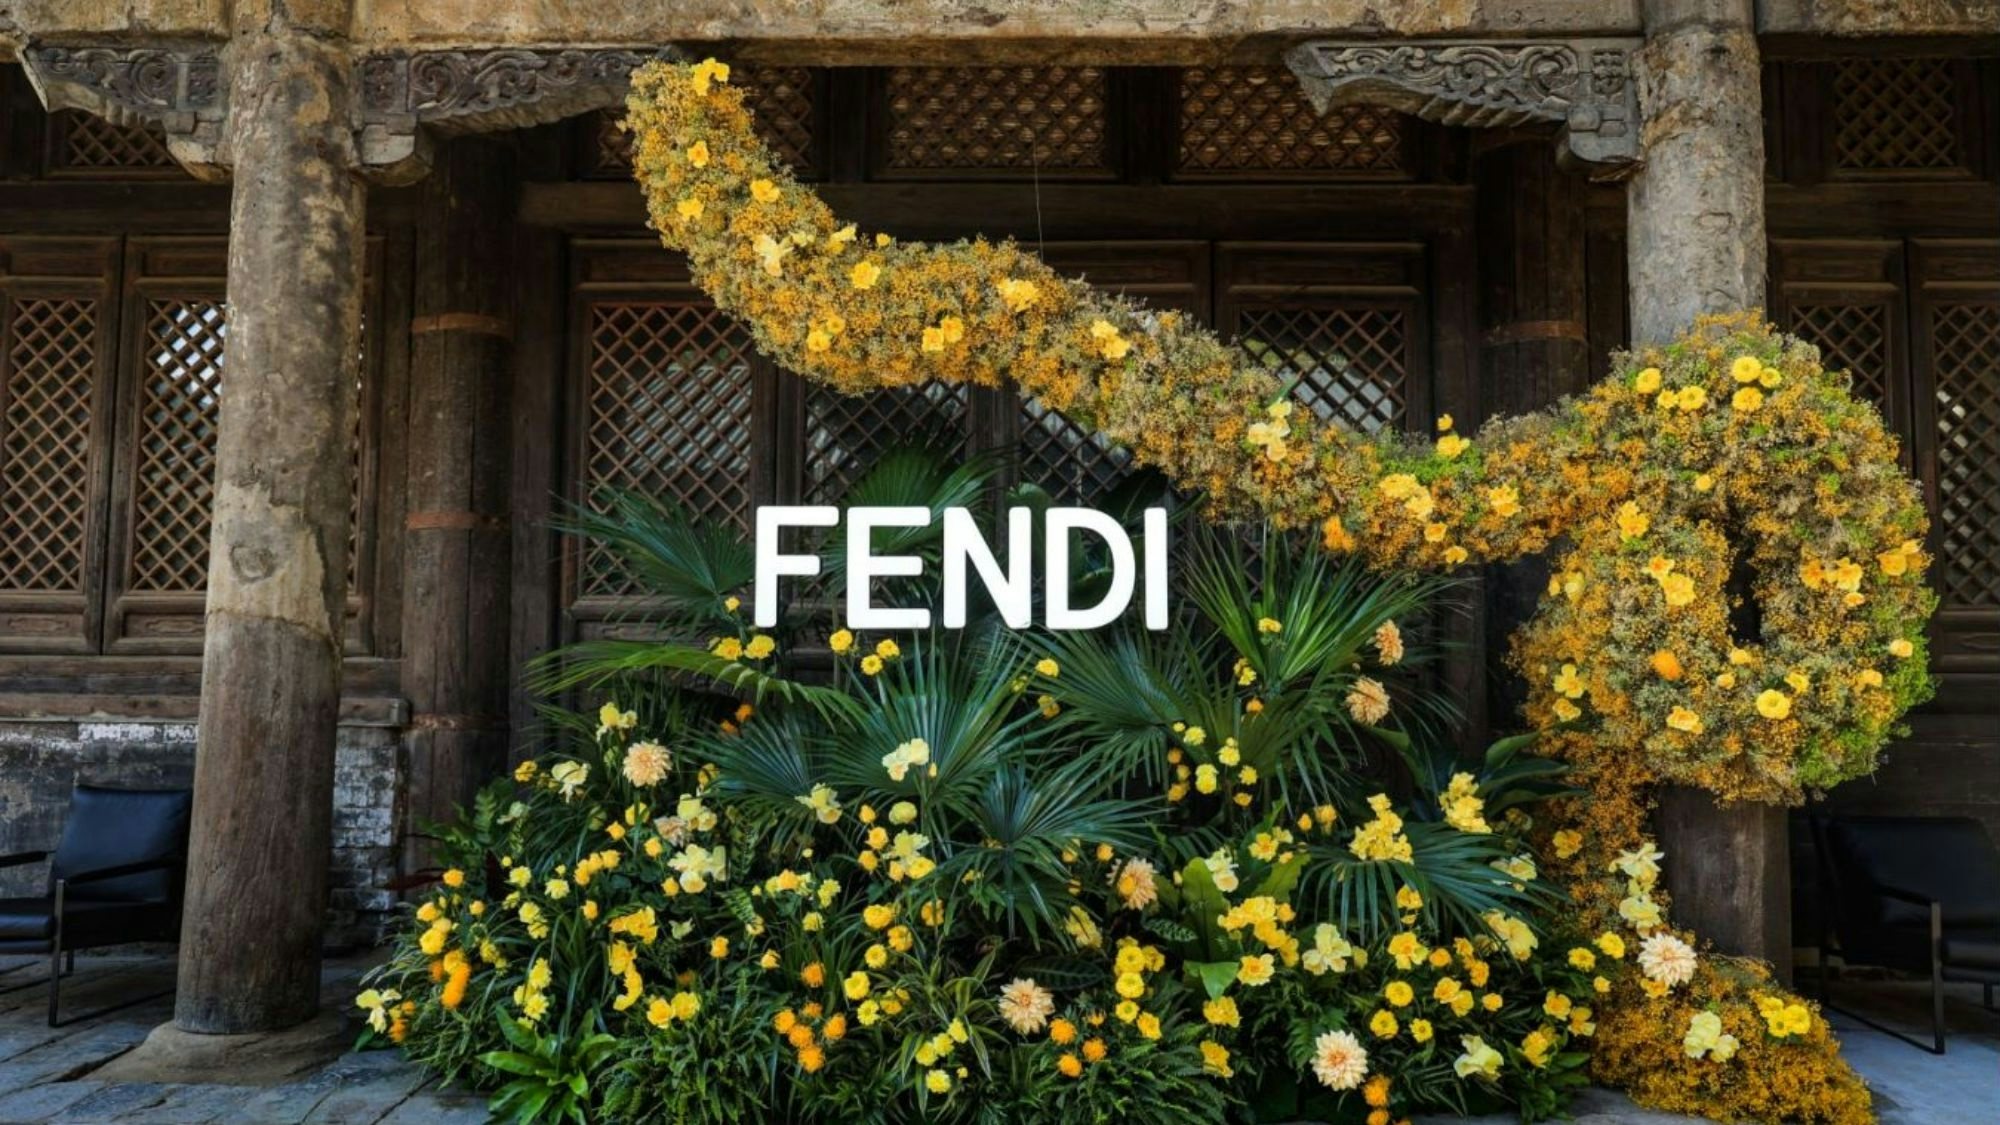 Fendi has combined consumer goods and culture to market itself to China in Beijing. Photo: Fendi